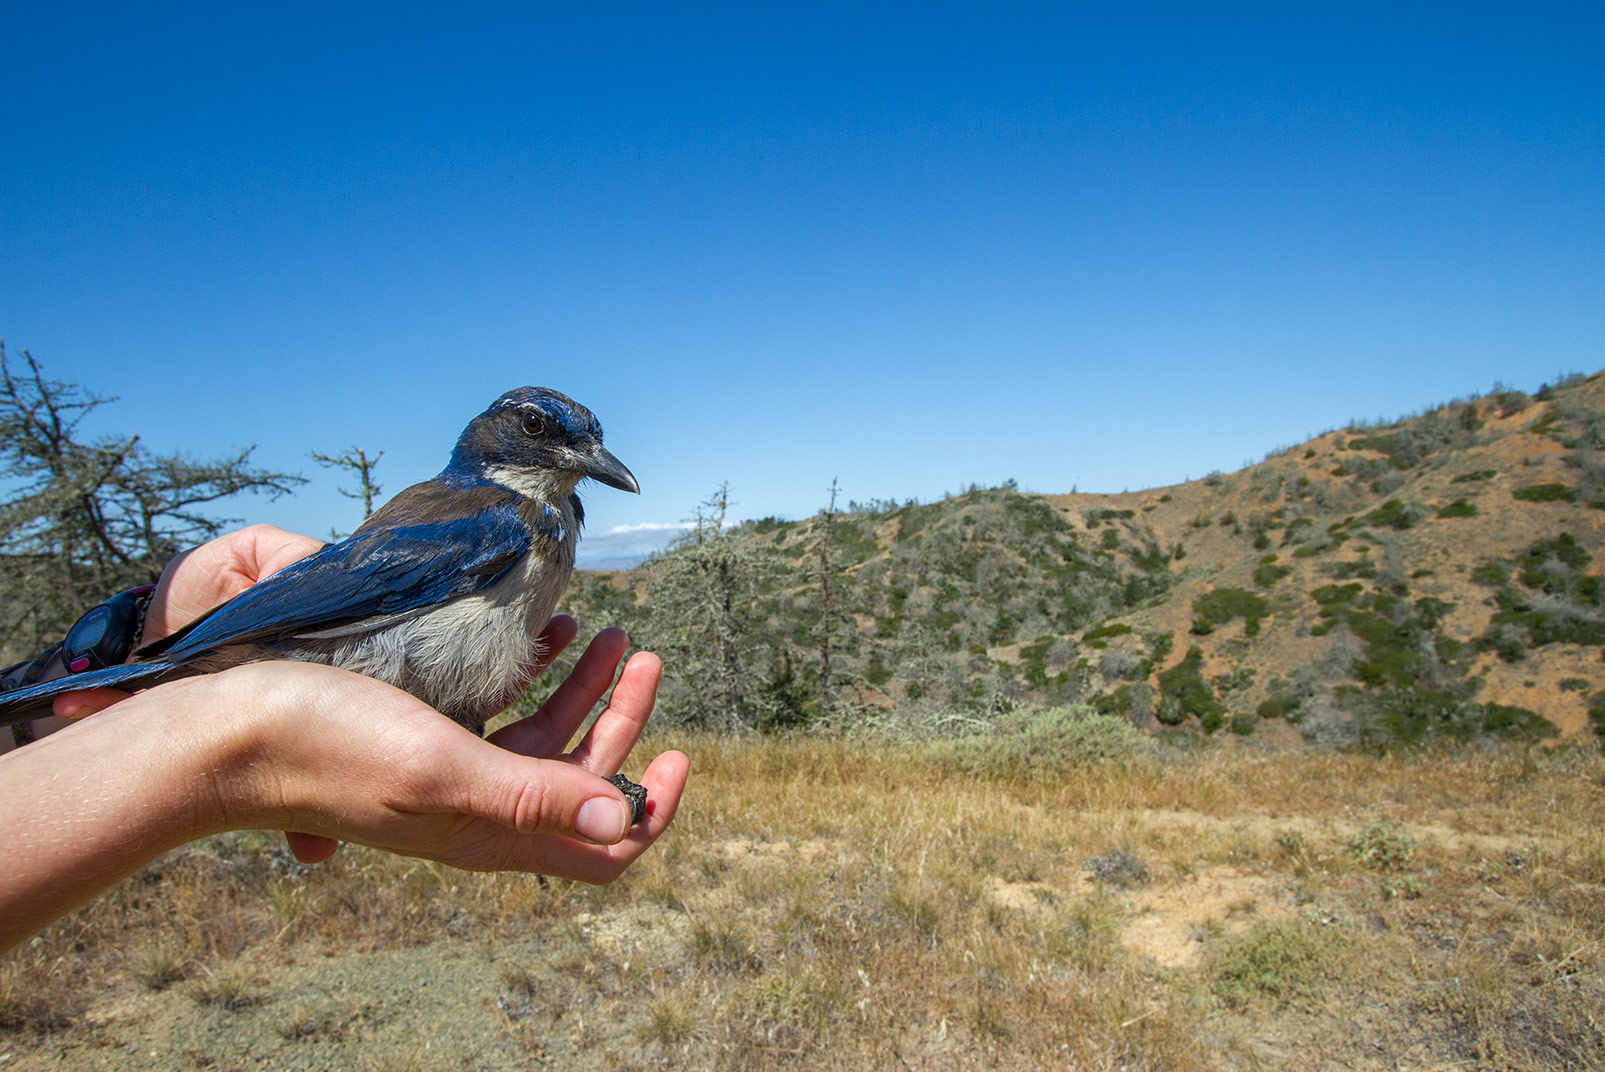 The birds are currently healthy (seen here on Daggett’s hand), but should any show signs of disease such as West Nile virus, the researchers will launch a vaccination effort to protect the other birds. Photo © Morgan Heim